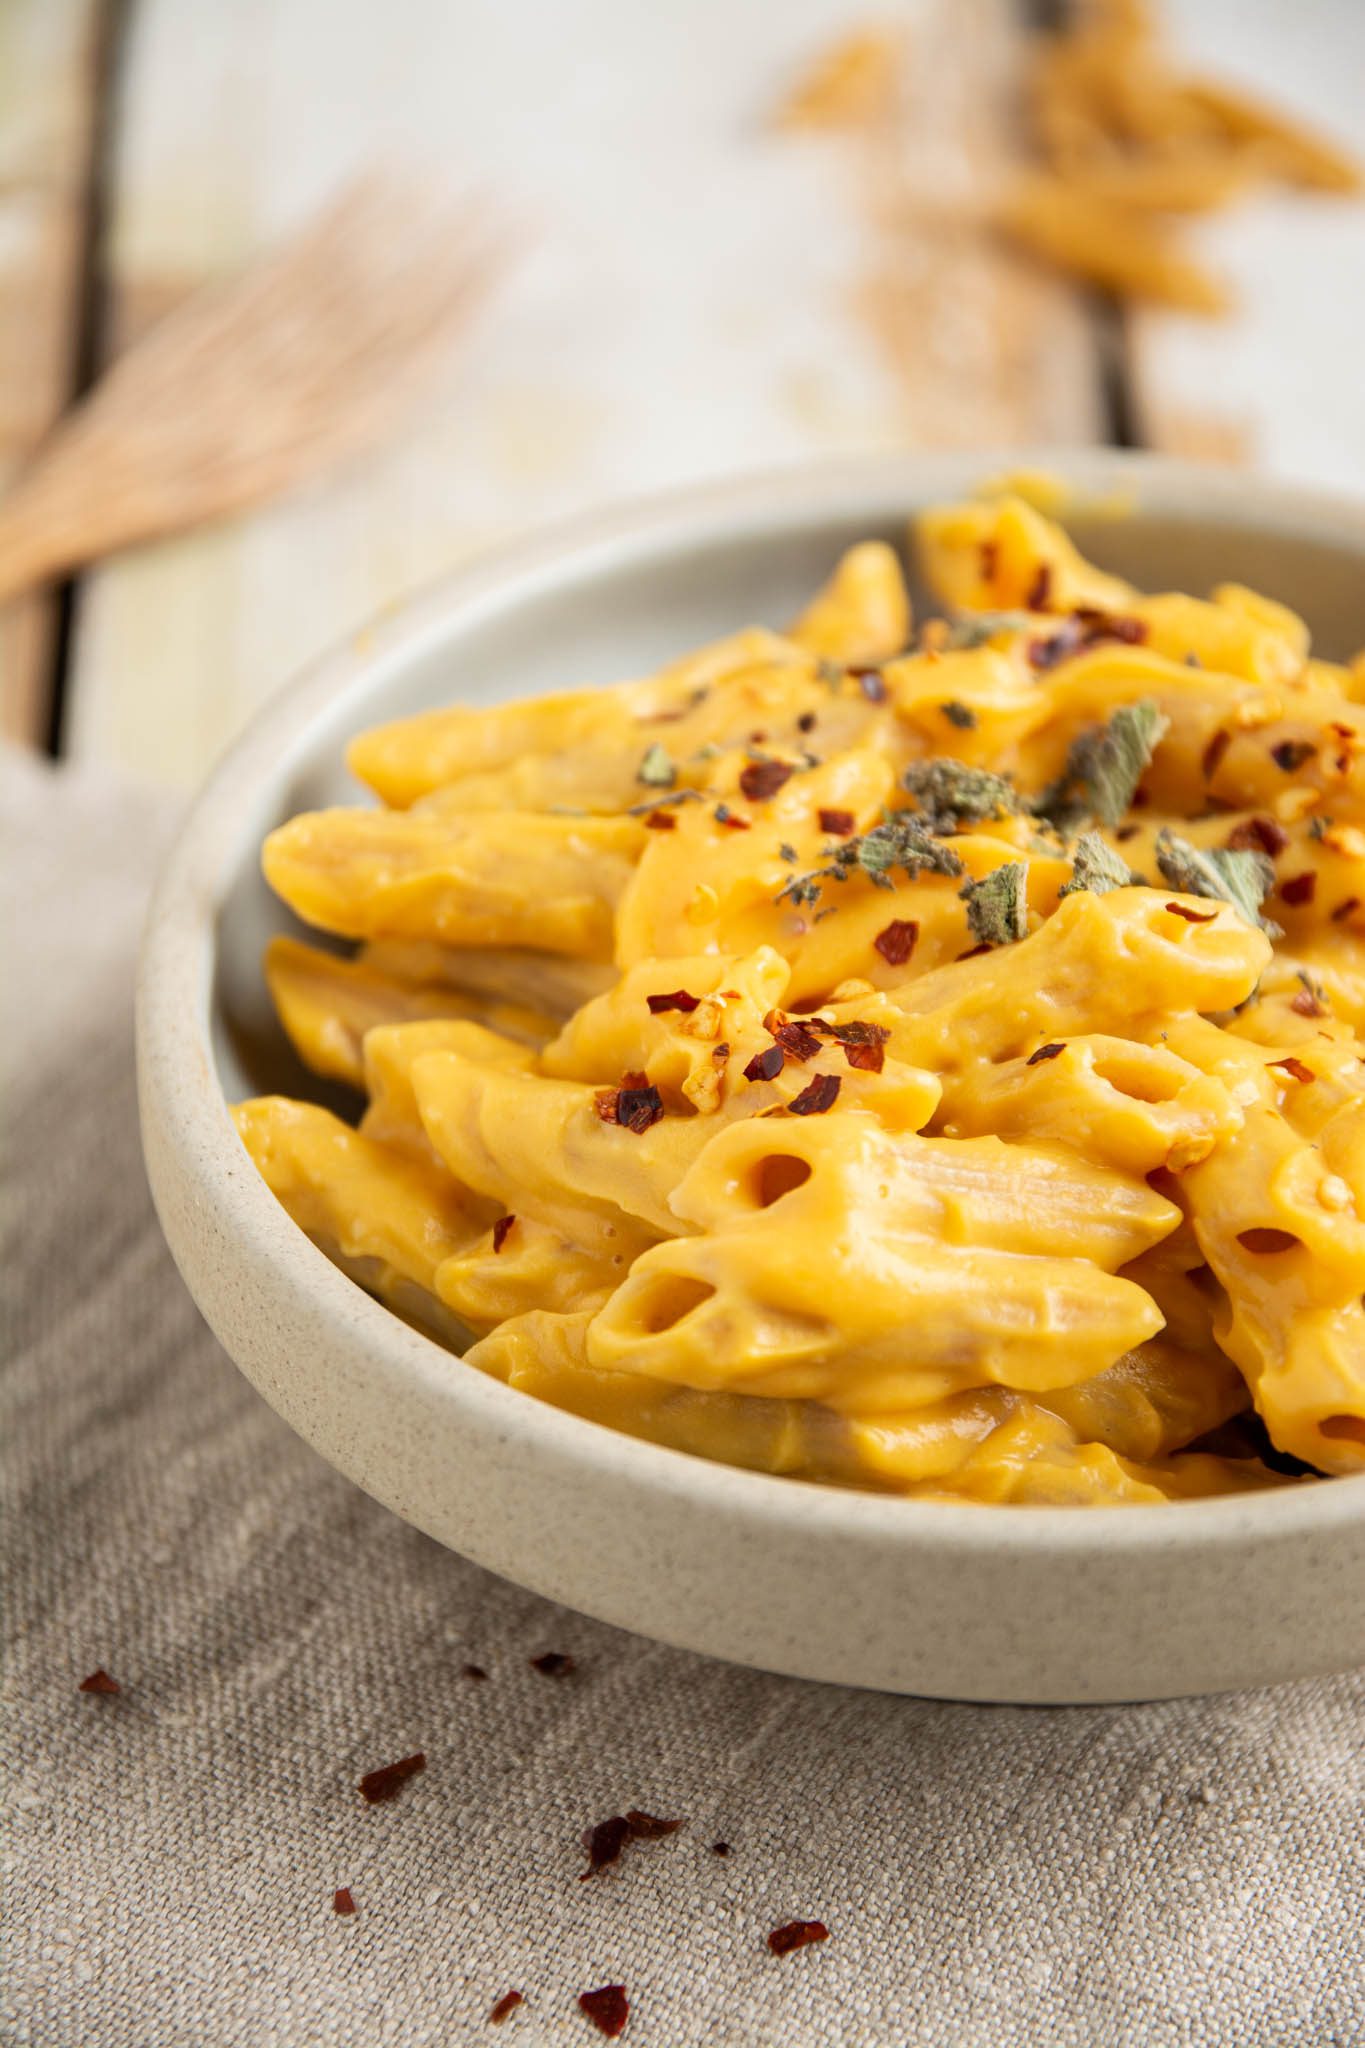 Learn how to make delicious and healthy vegan butternut squash mac and cheese. Besides being plant-based, this recipe is also nut-free, oil-free, and low-fat. Besides, it's very easy to make.